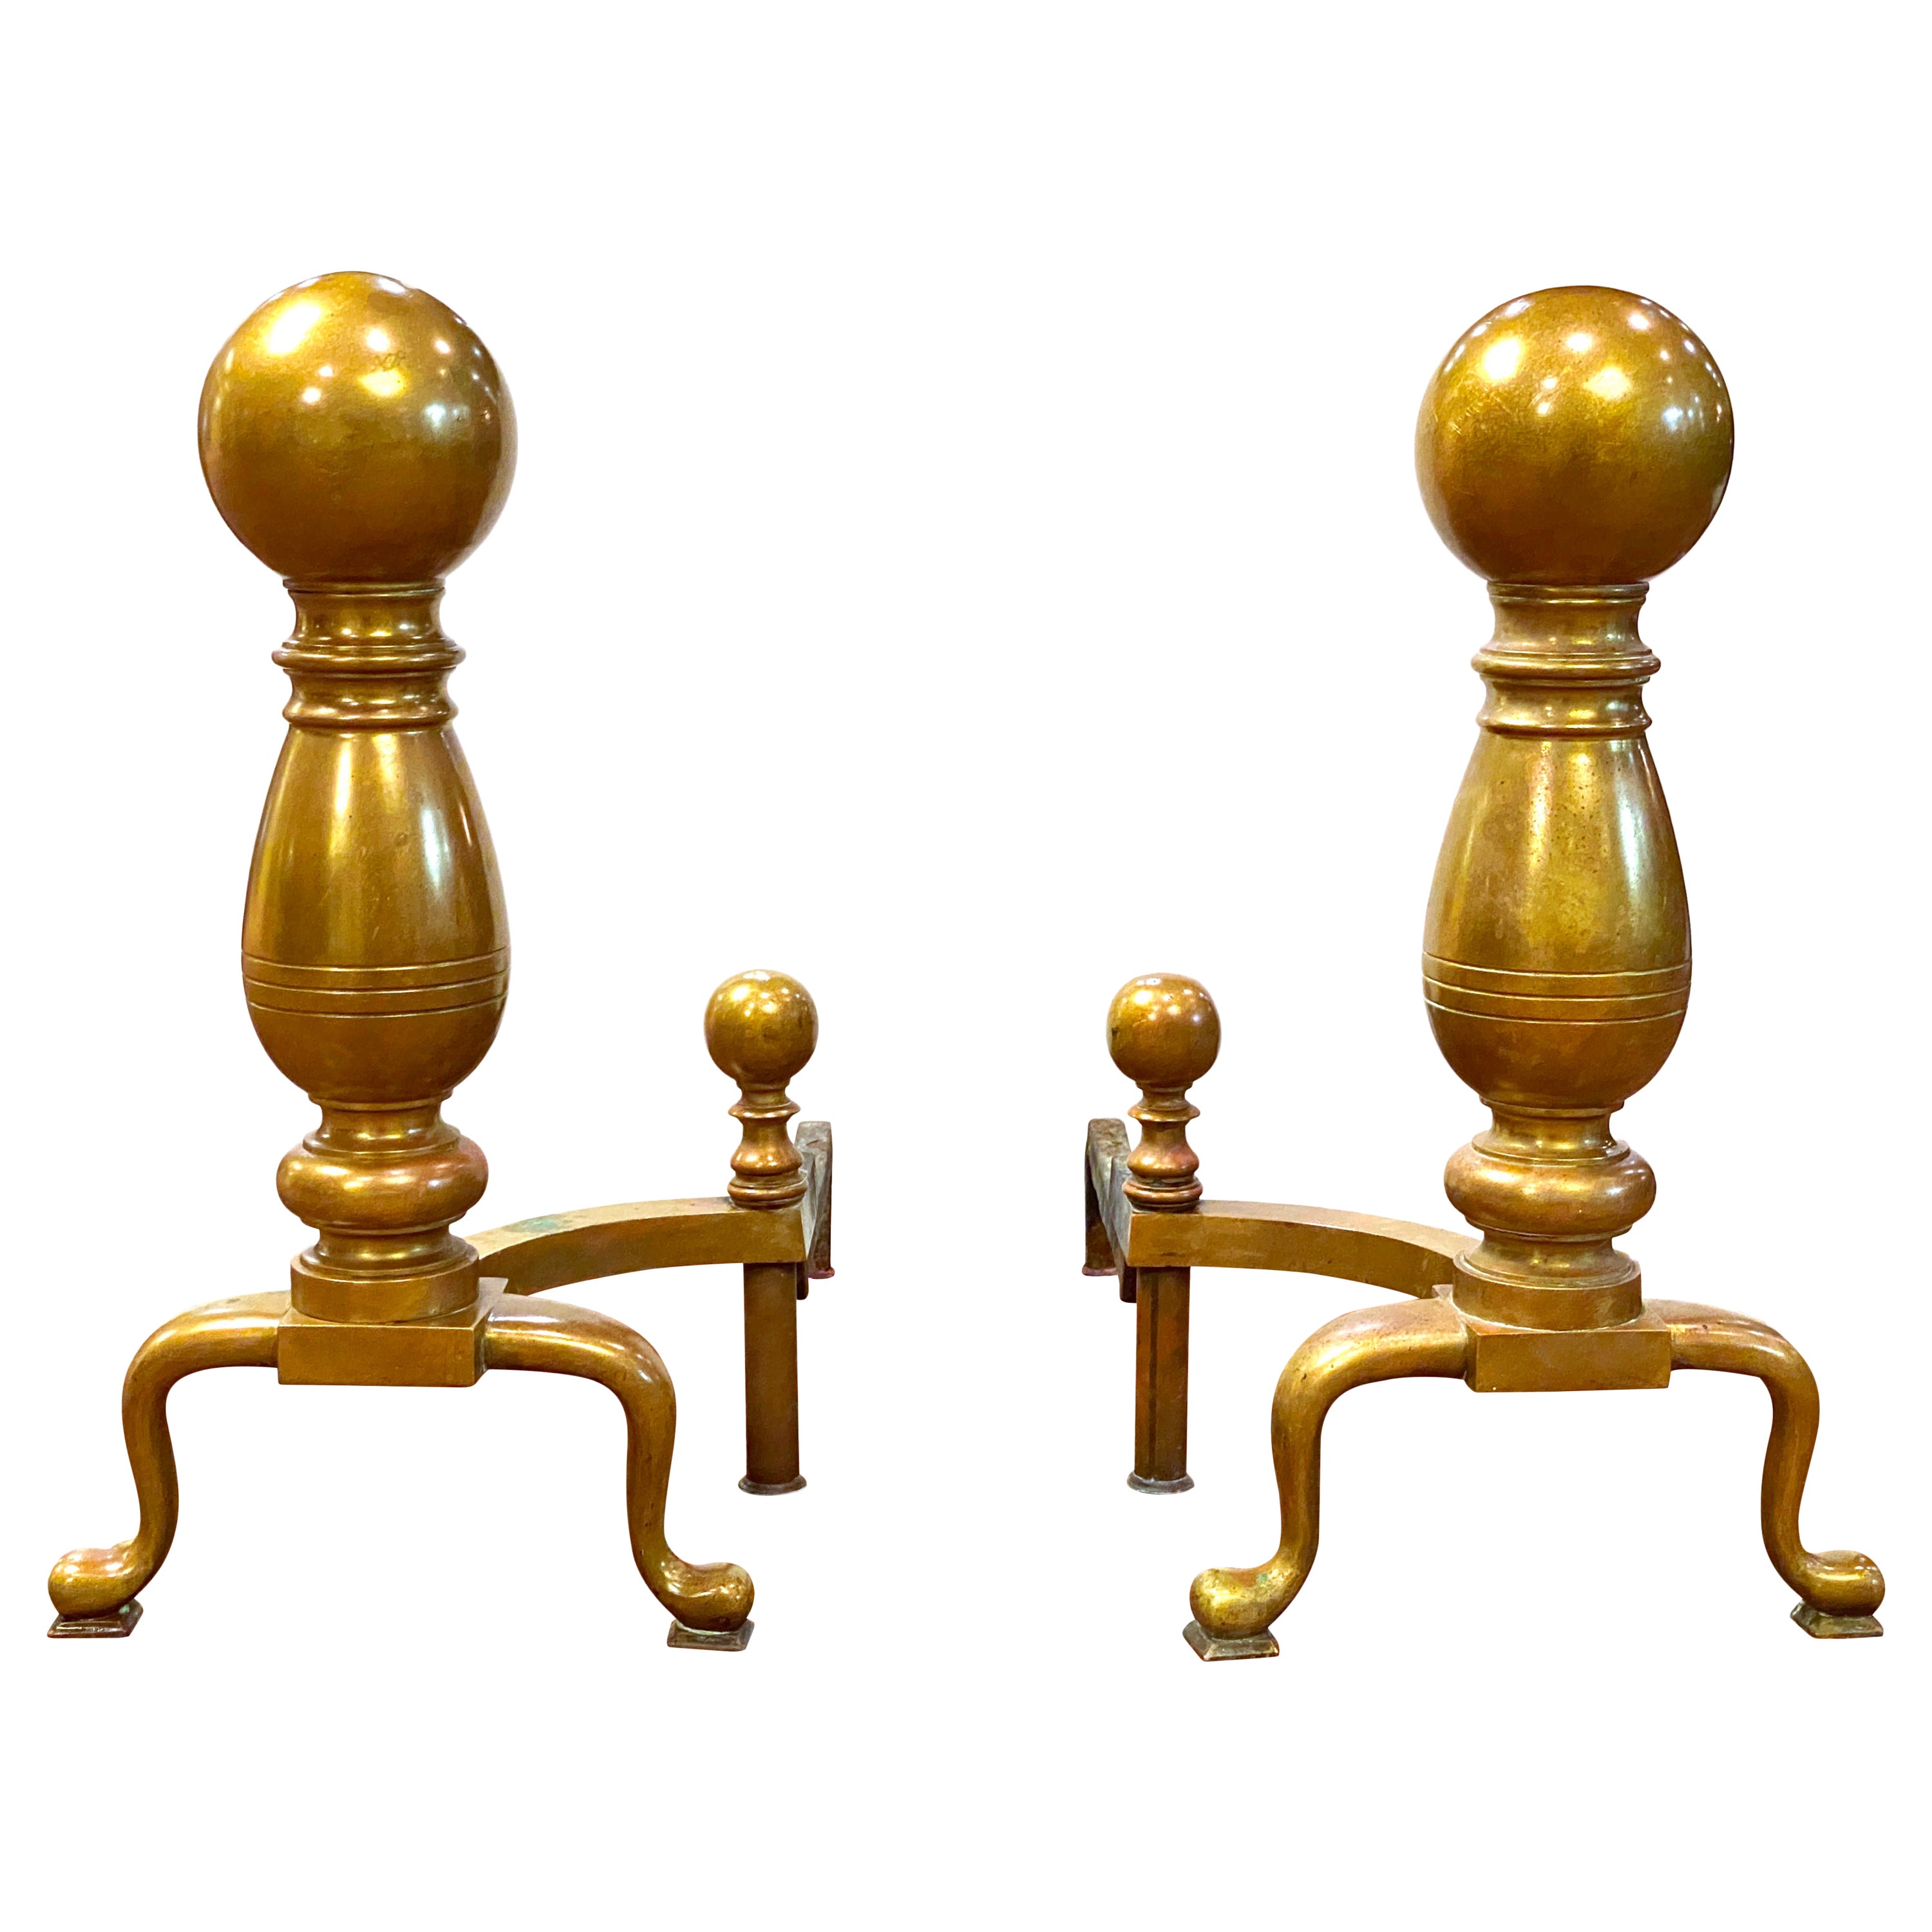 American Aesthetic Movement Brass Andirons For Sale